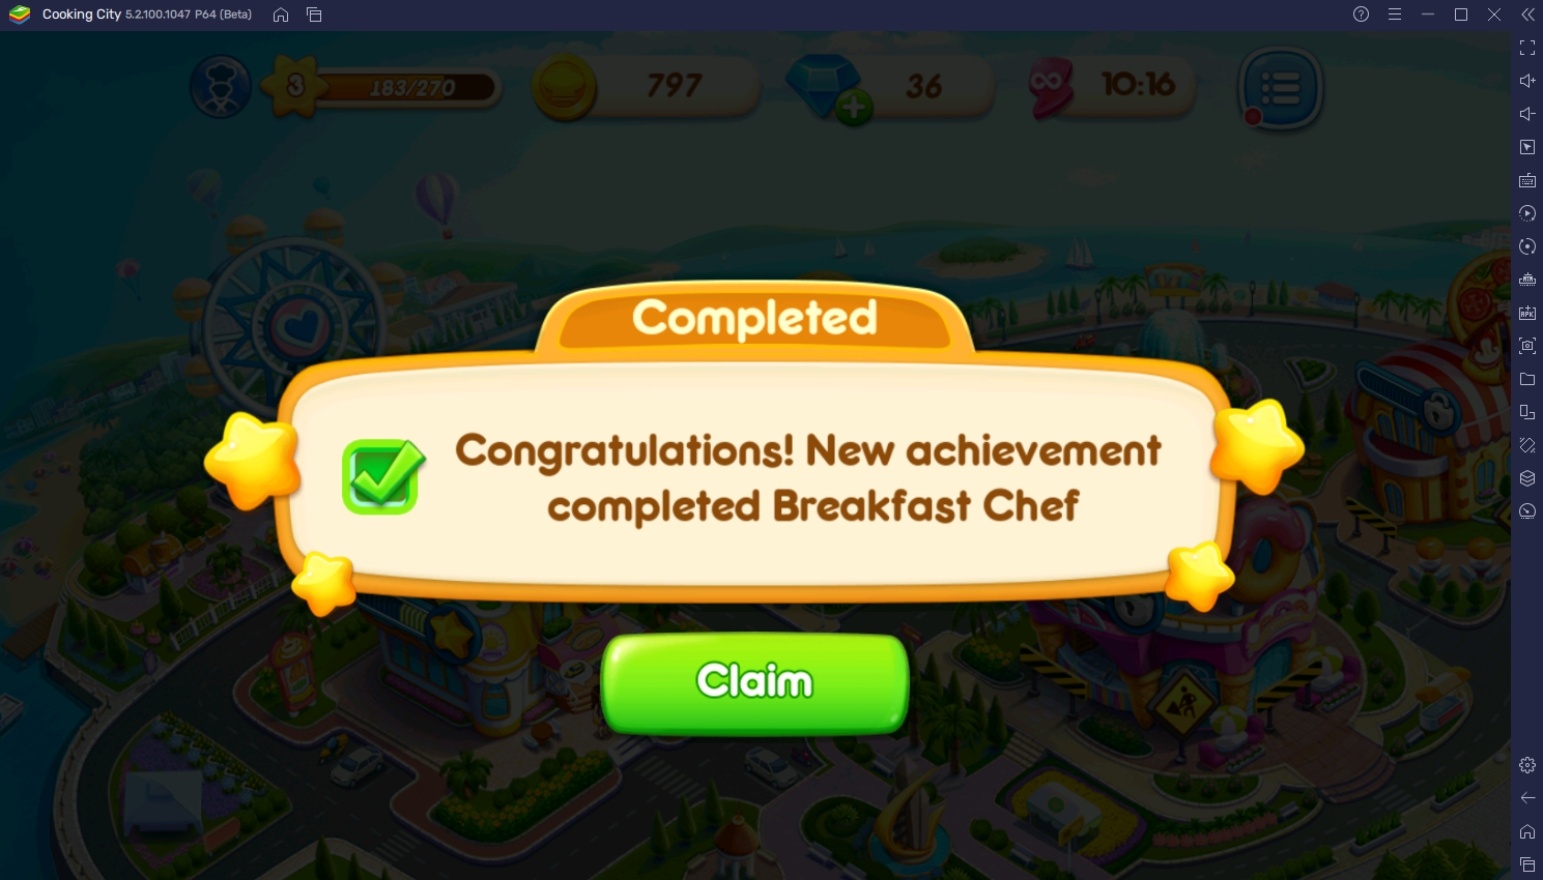 How to Earn More Coins in Cooking City: Restaurant Games